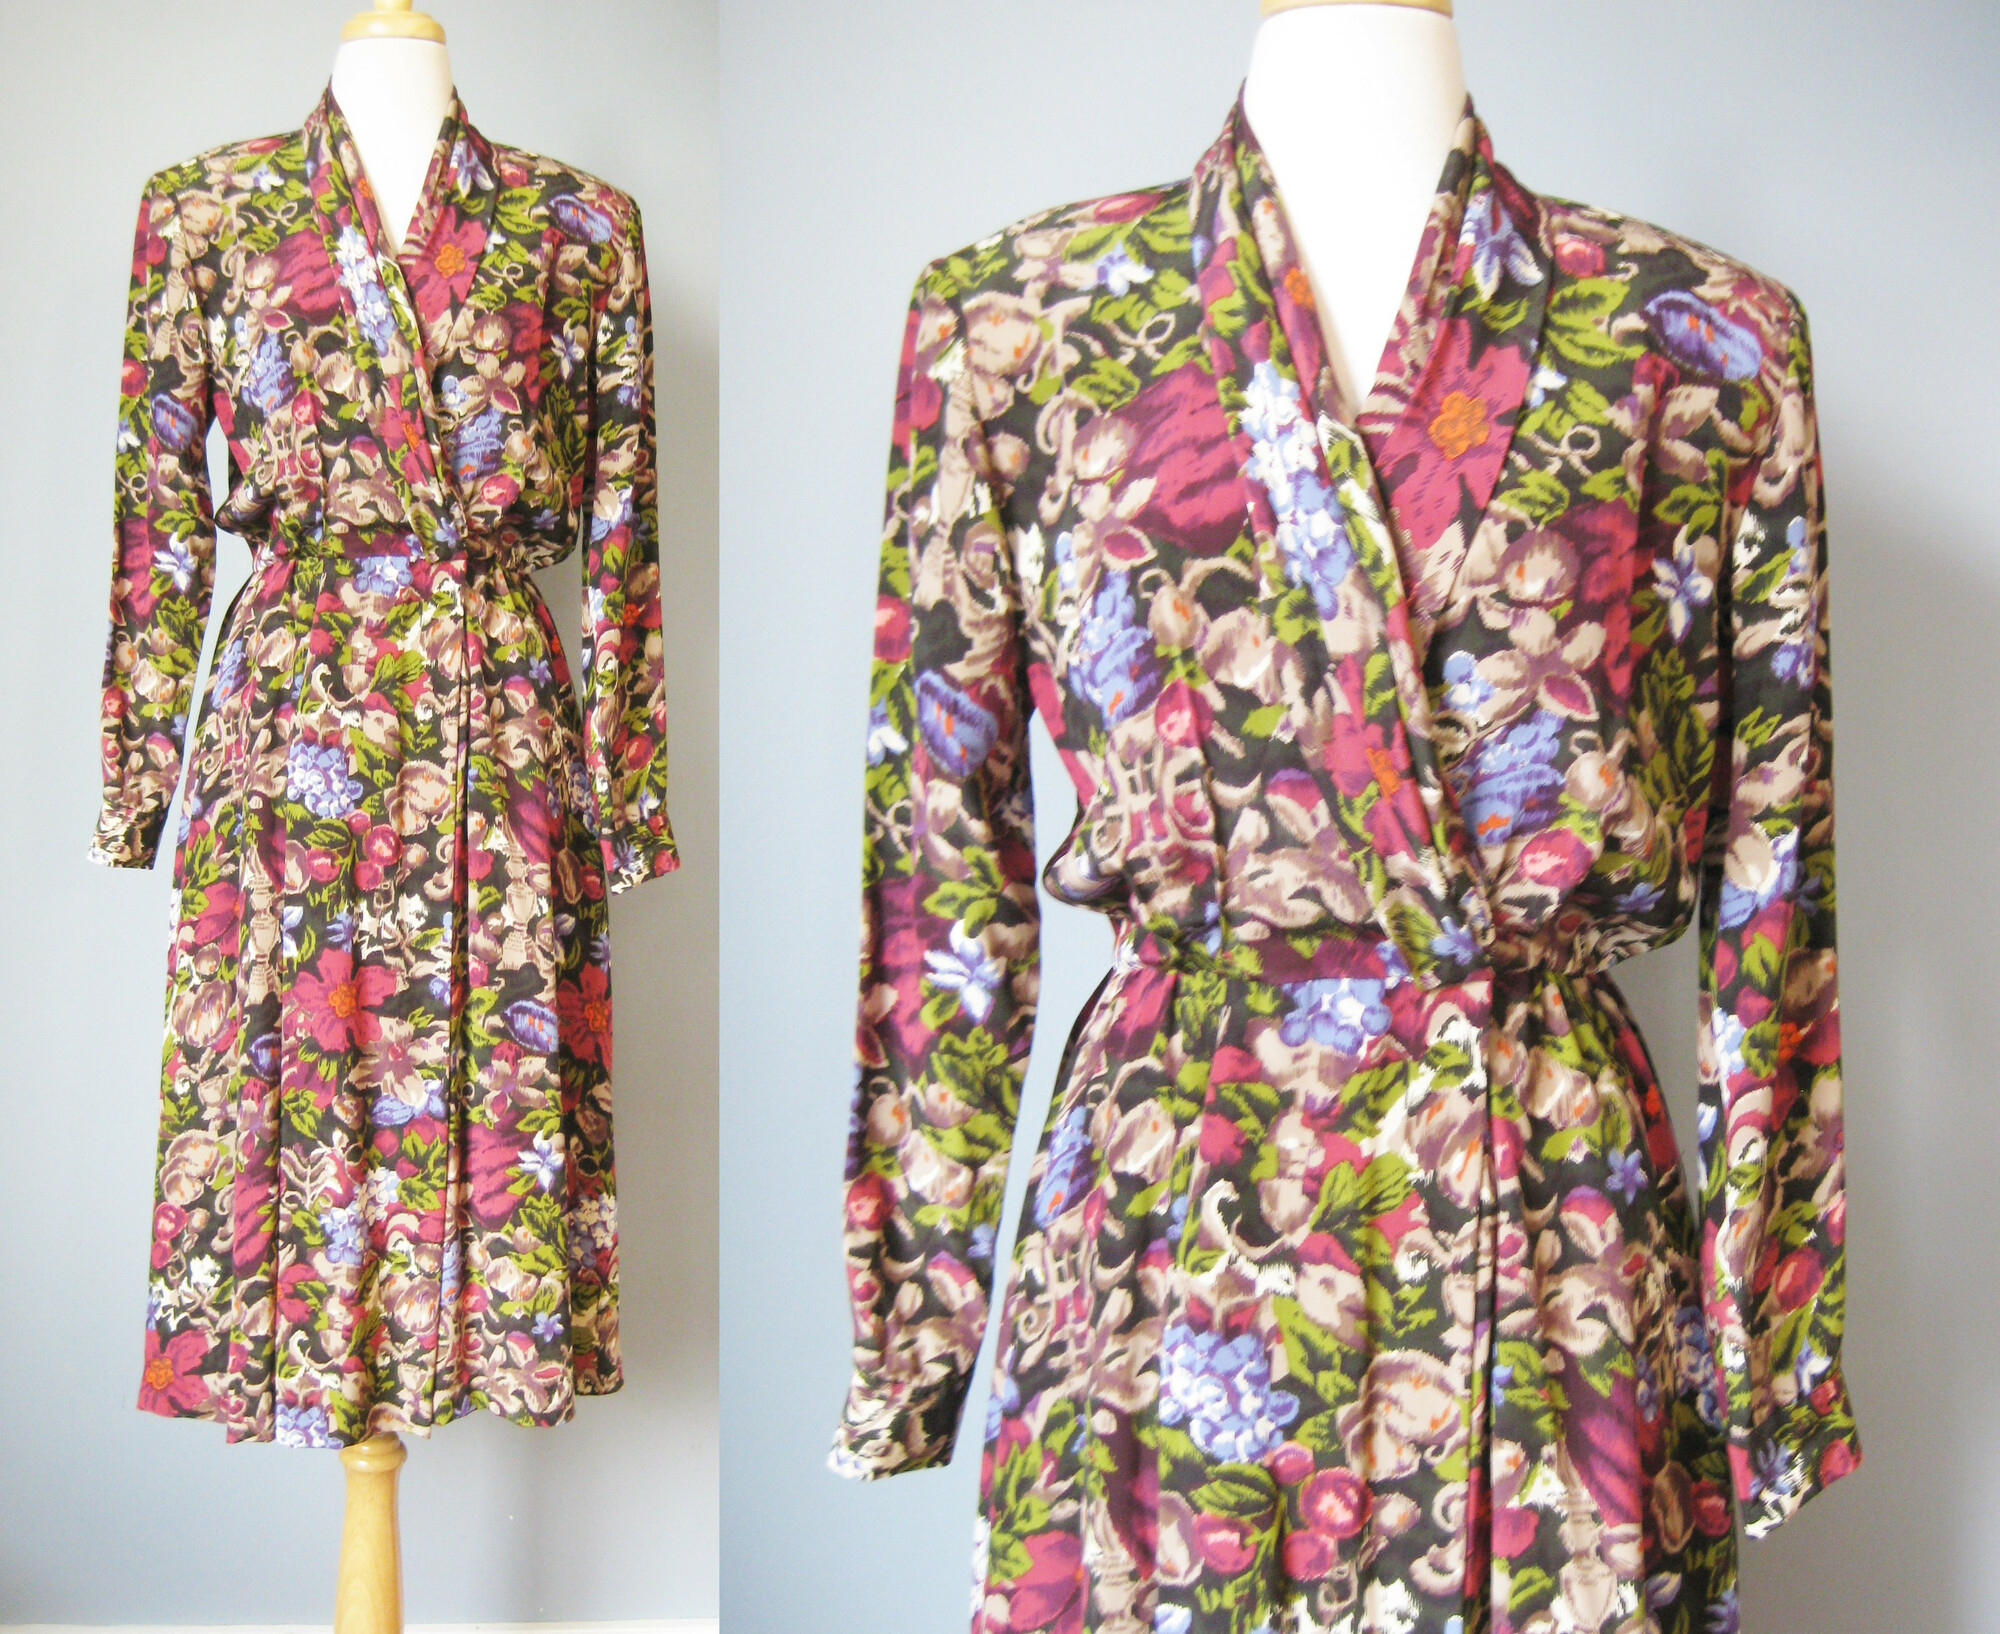 Here is a pretty silk secretary dress from the 1980s.  It's made of a silk in a sophisticated ikat style floral print.  The surplice neckline closes with buttons and hooks, it's really securely together in the front.  Elastic Waist. Unlined.  Removable shoulder pads snap off and on.

The colors are burgundy, olive green and blue but it gives off a warm tone bronazy vibe.

Long sleeve

Flat measurements:
Shoulder to shoulder: 16.34
armpit to armpit: 19
Waist: 12 to 15
Hip: free
Length: 46.25
Underarm sleeve seam: 18.5 (sleeve buttons at the end)

perfect condition!

Thanks for looking!
#36266